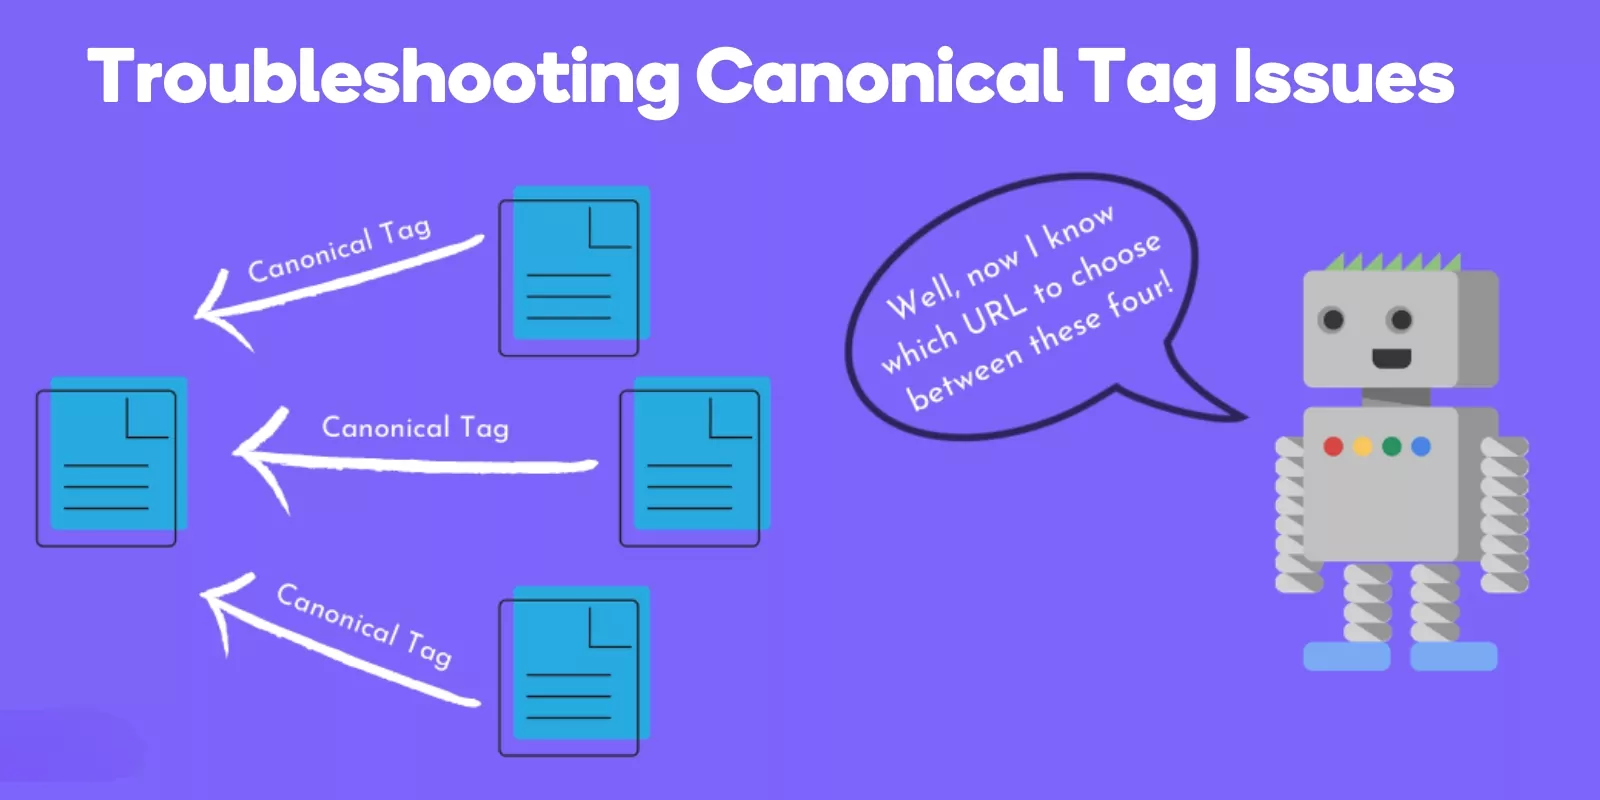 Troubleshooting Canonical Tag Issues